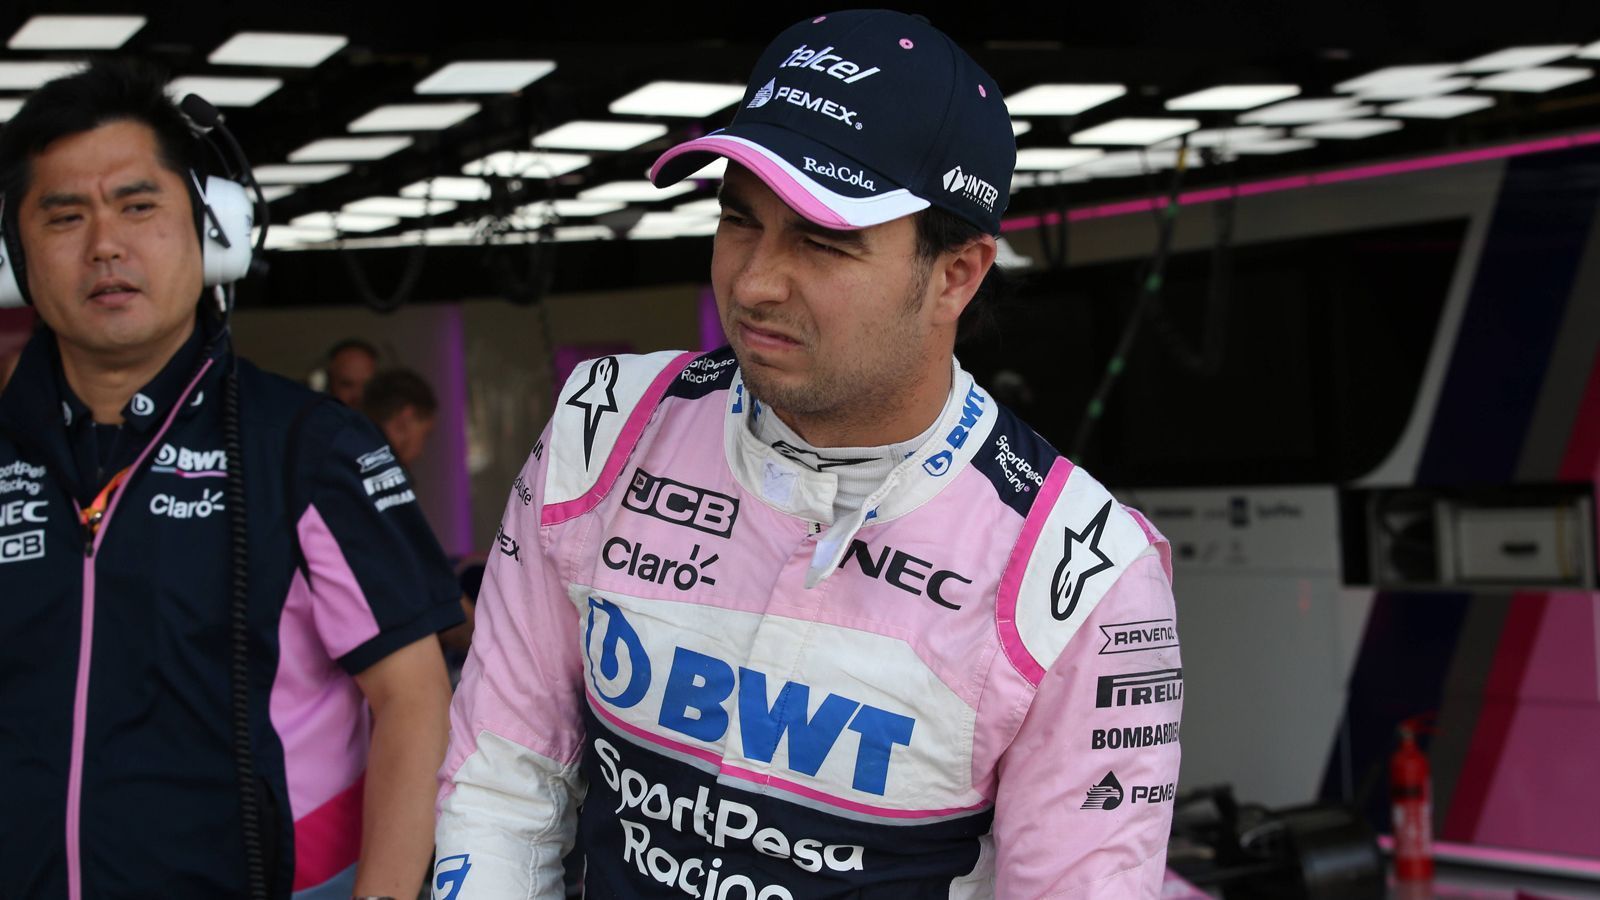 
                <strong>7. Sergio Perez</strong><br>
                Punkte insgesamt: 15Aktuelle Punkte: 4Punkte 2014: 2Punkte 2015: 2Punkte 2016: 3Punkte 2017: 2Punkte 2018: 5Punkte 2019: 1
              